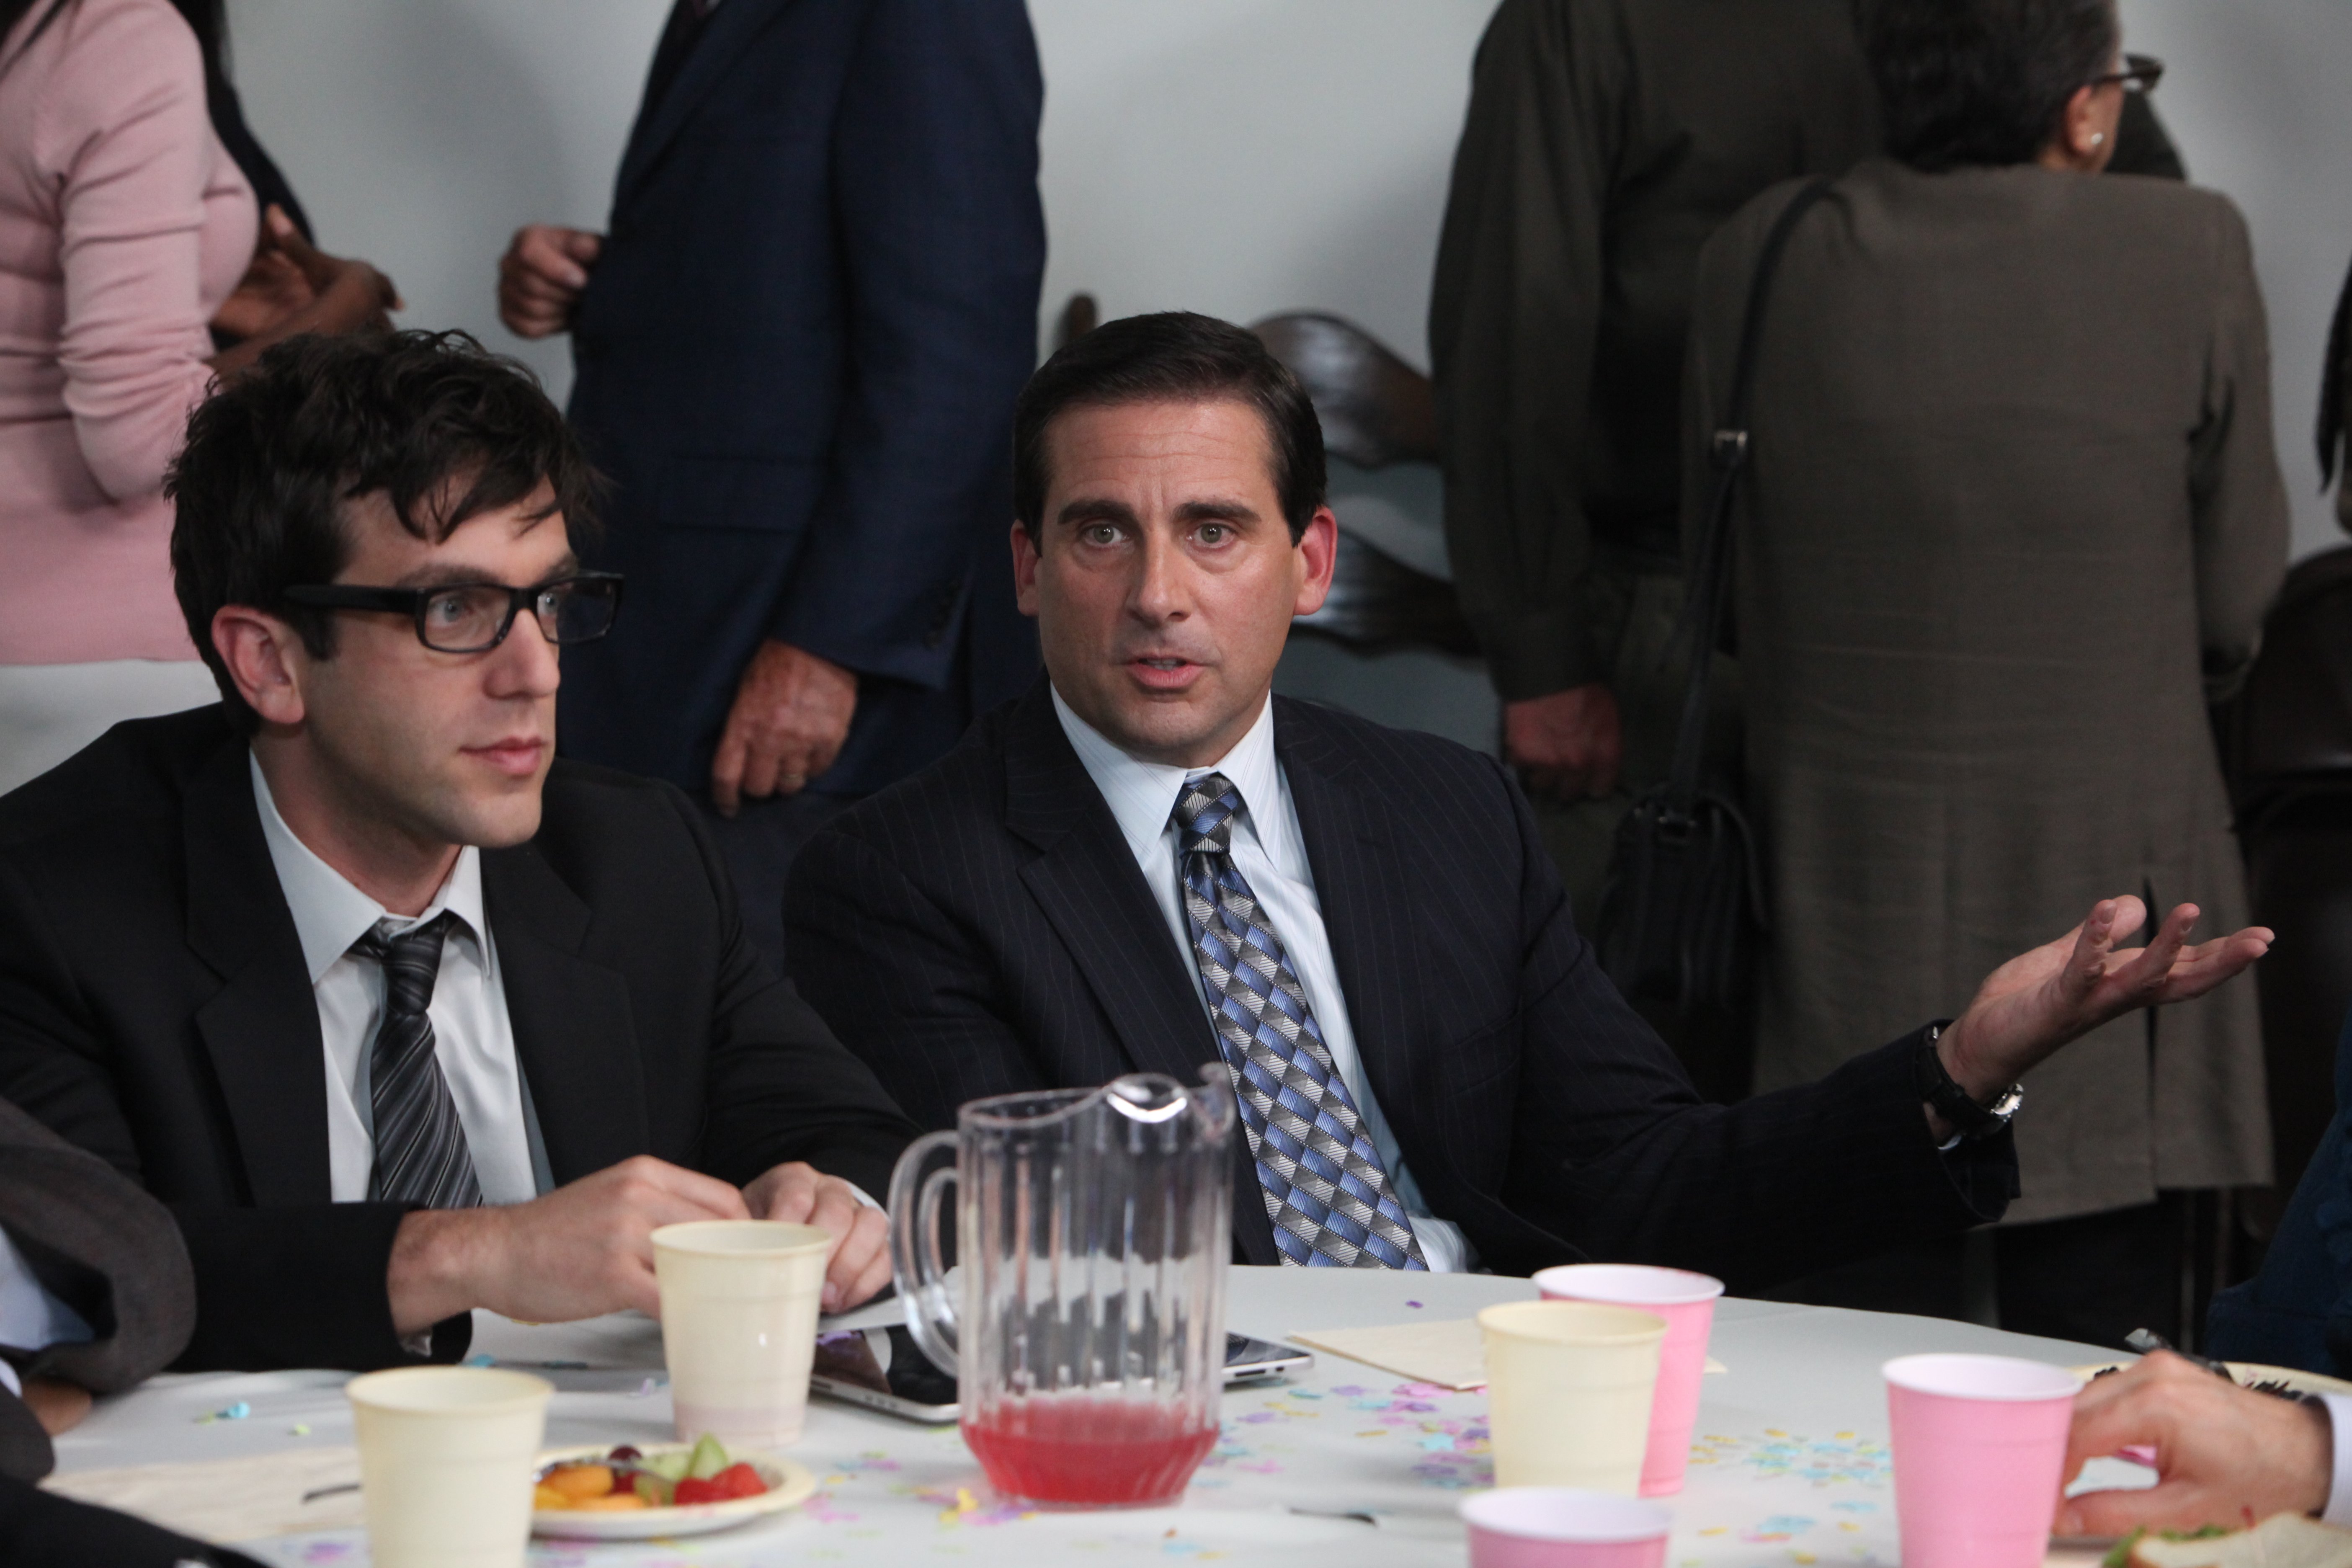 BJ Novak and Steve Carell as Ryan and Michael on 'The Office'